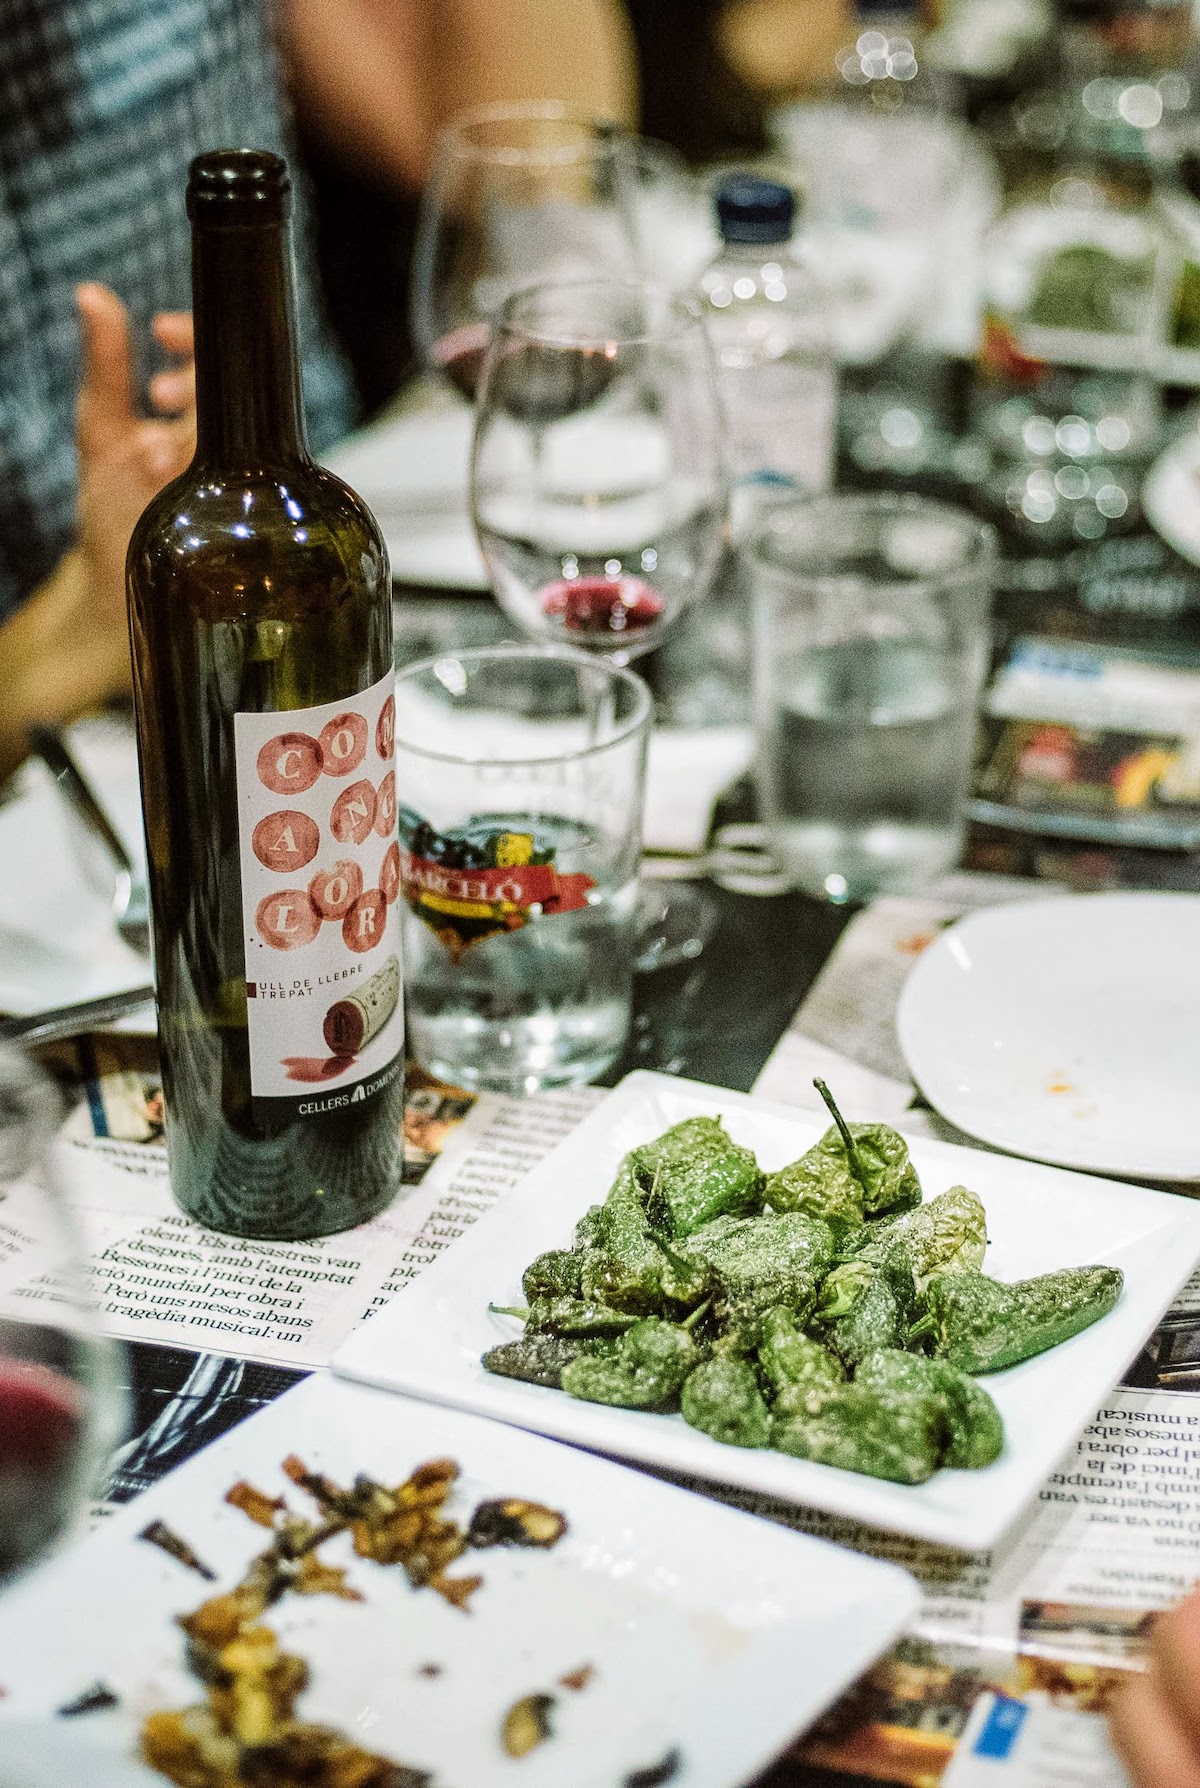 Small green peppers on a white plate beside a bottle of wine on a crowded tabletop